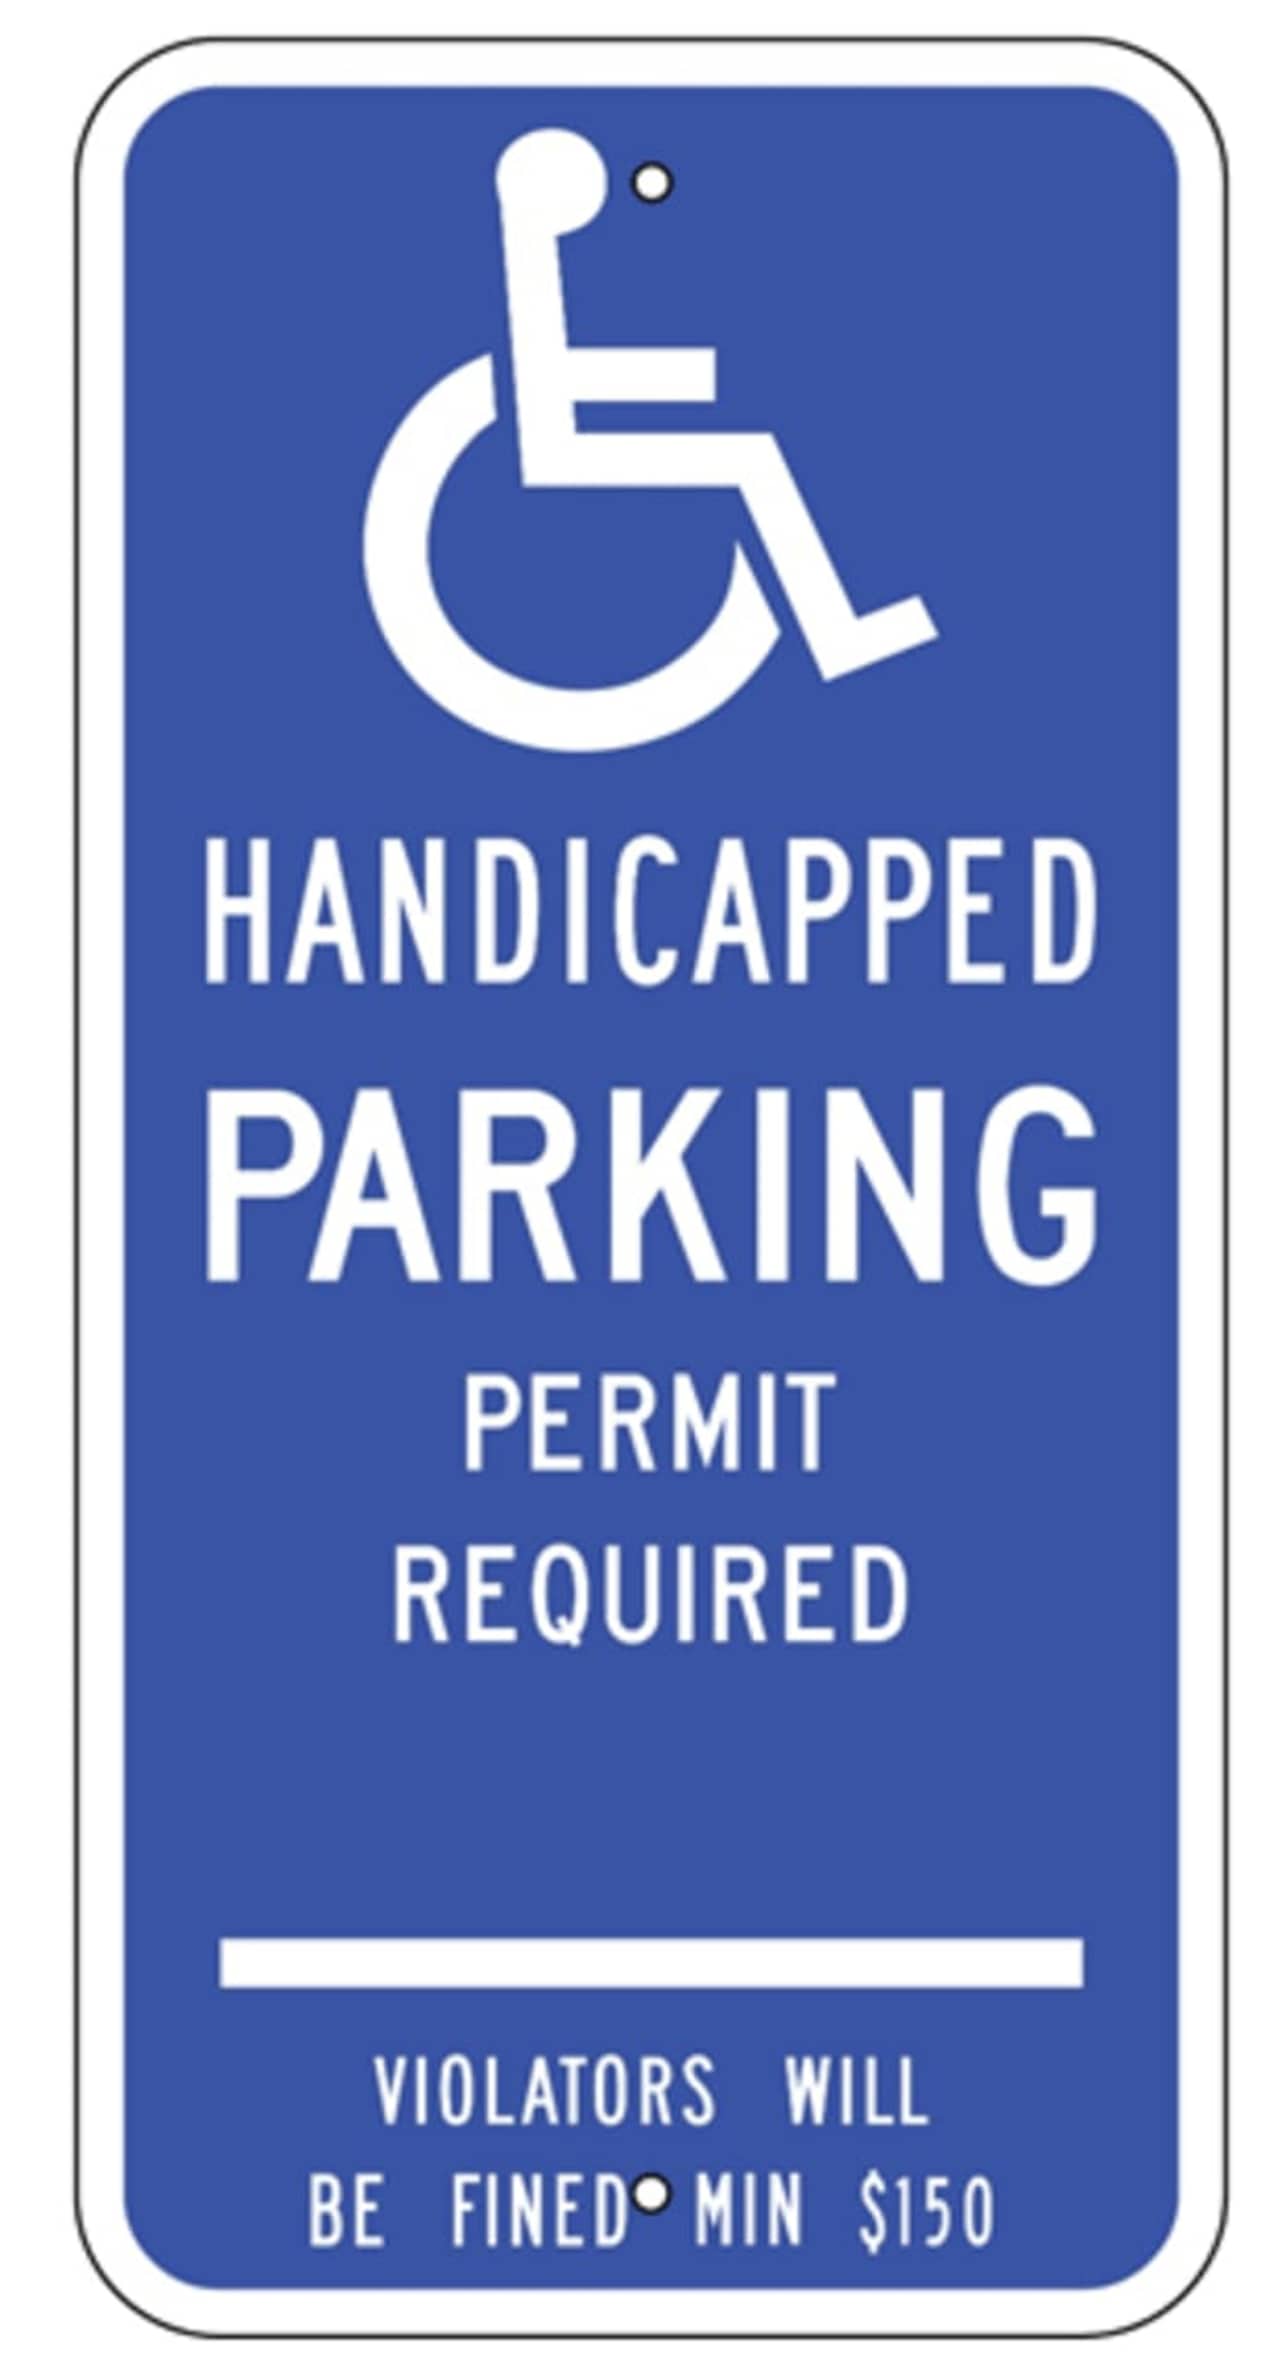 The New Canaan Parking Commission voted in favor of charging handicapped motorists to park in certain lots.